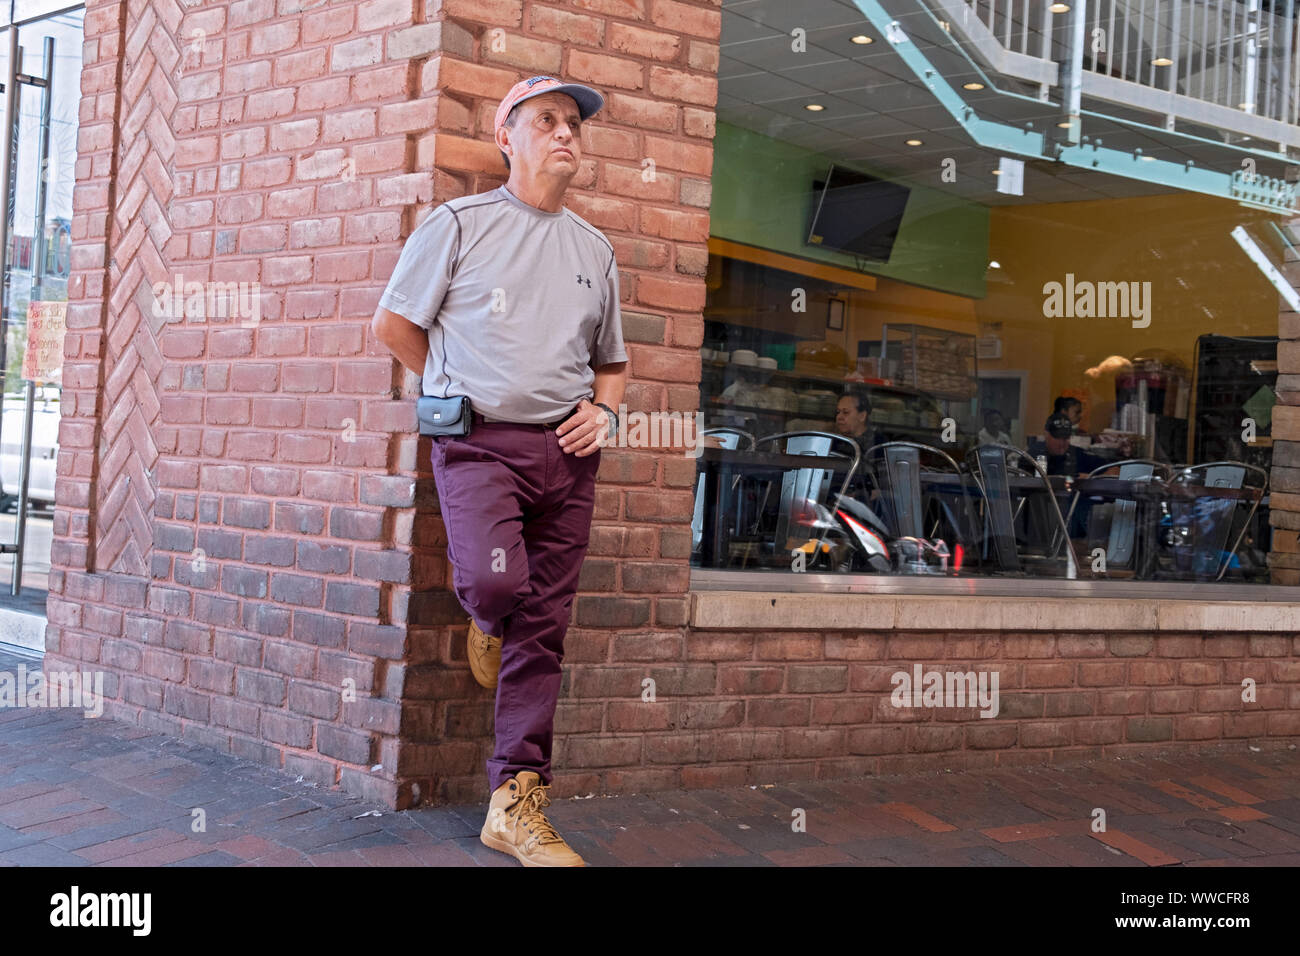 A middle aged man lost in thought while leaning up against a building. Under the elevated subway in Jackson Heights, Queens, New York City. Stock Photo